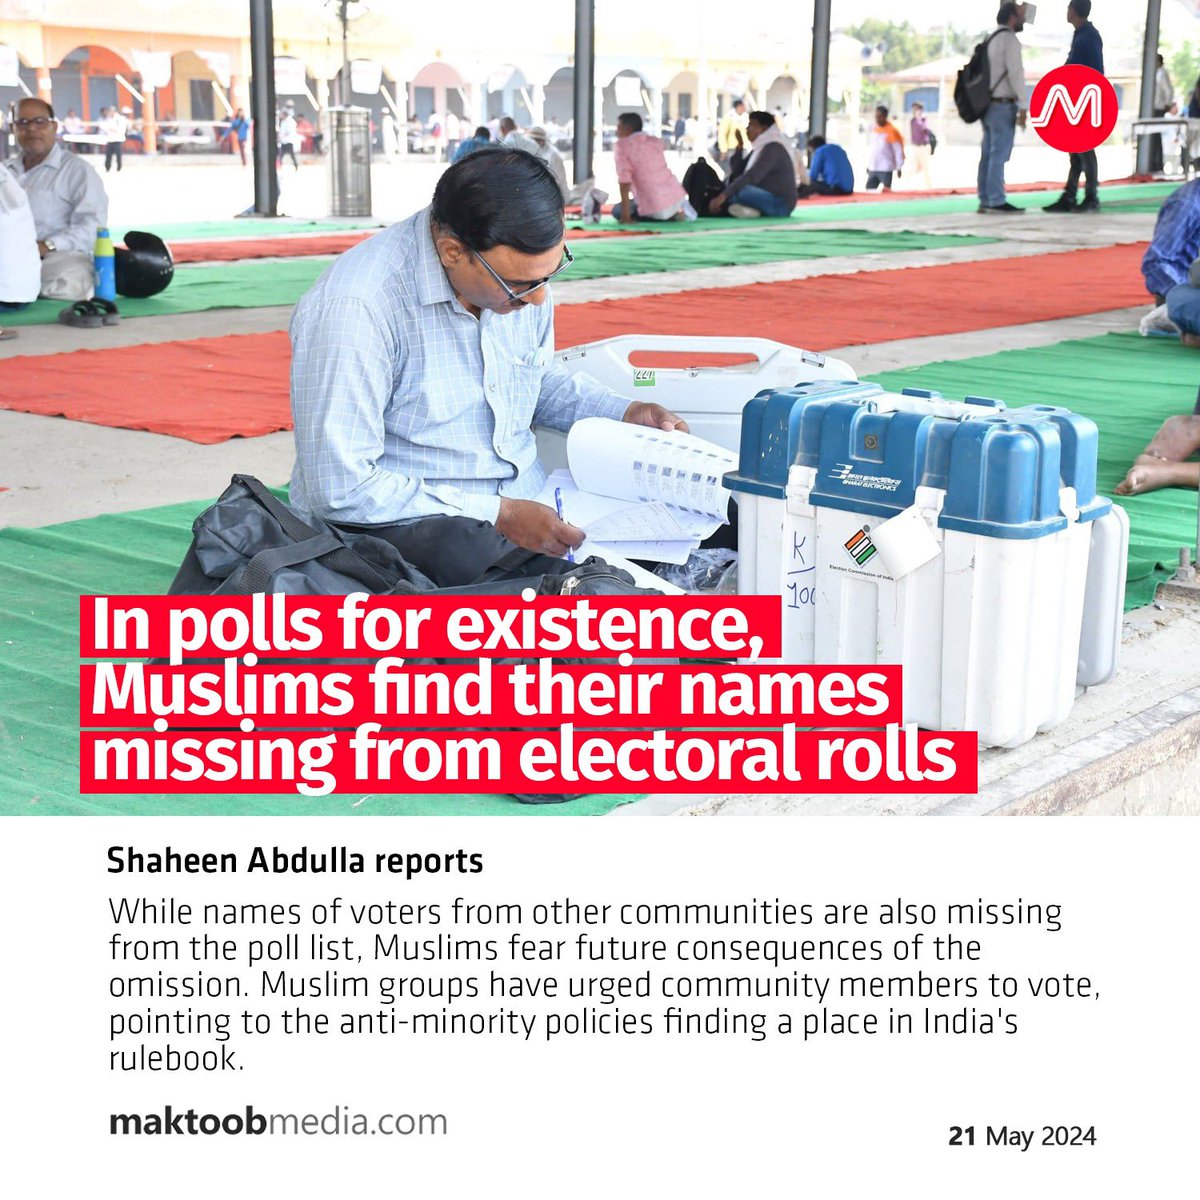 While names of voters from other communities are also missing from the poll list, Muslims fear future consequences of the omission. Muslim groups have urged community members to vote, pointing to the anti-minority policies finding a place in India's rulebook. @shaheenjournal